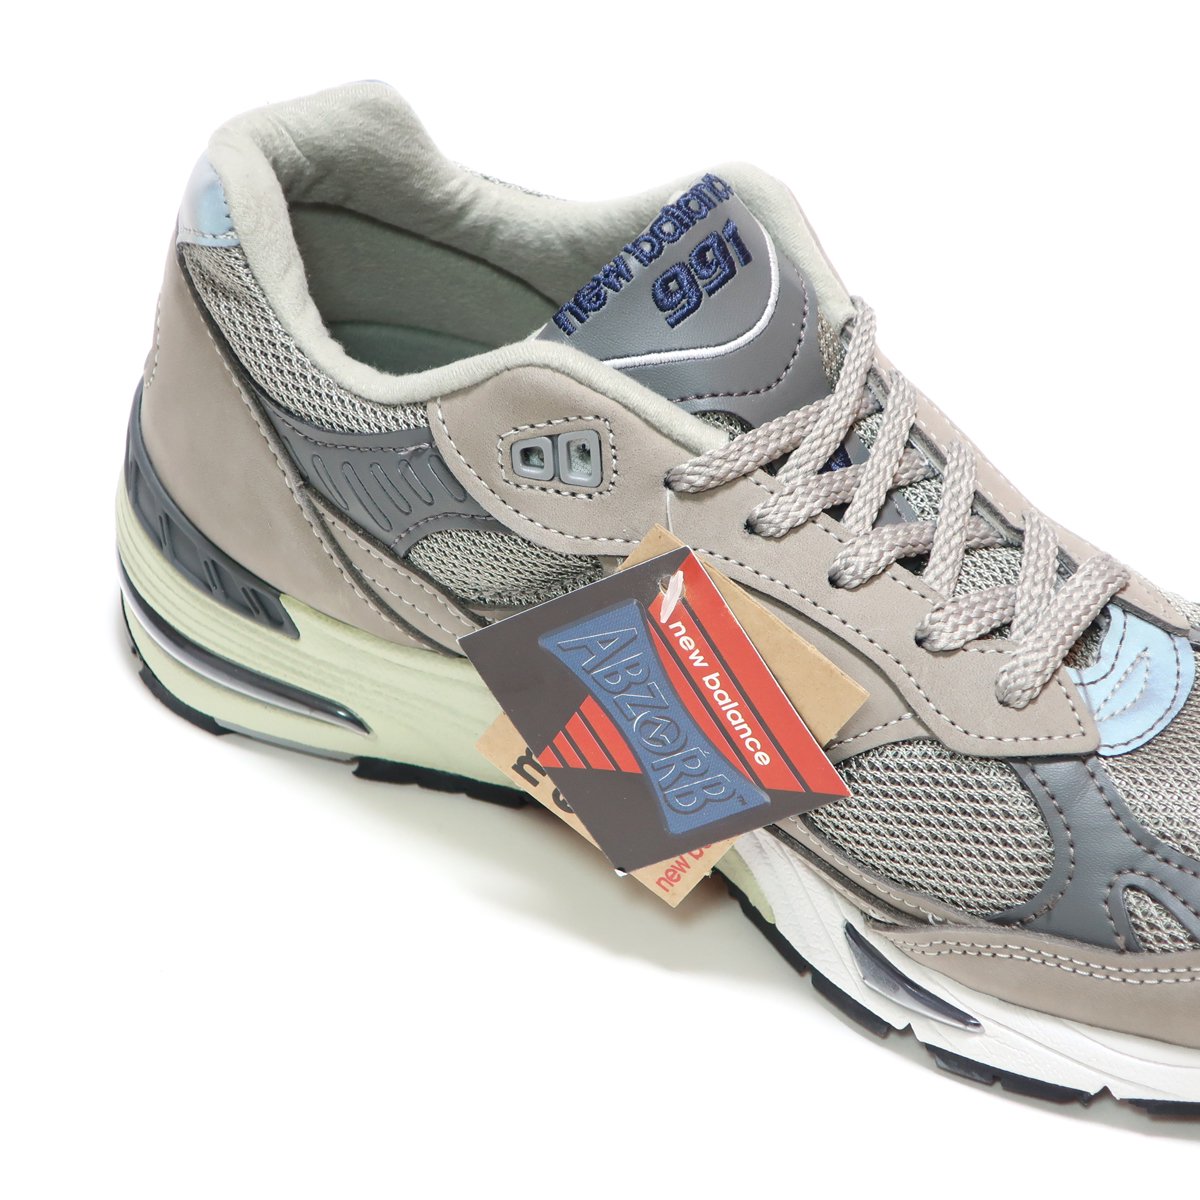 NEW BALANCE M991ANI GRAY GREY SUEDE MADE IN ENGLAND 